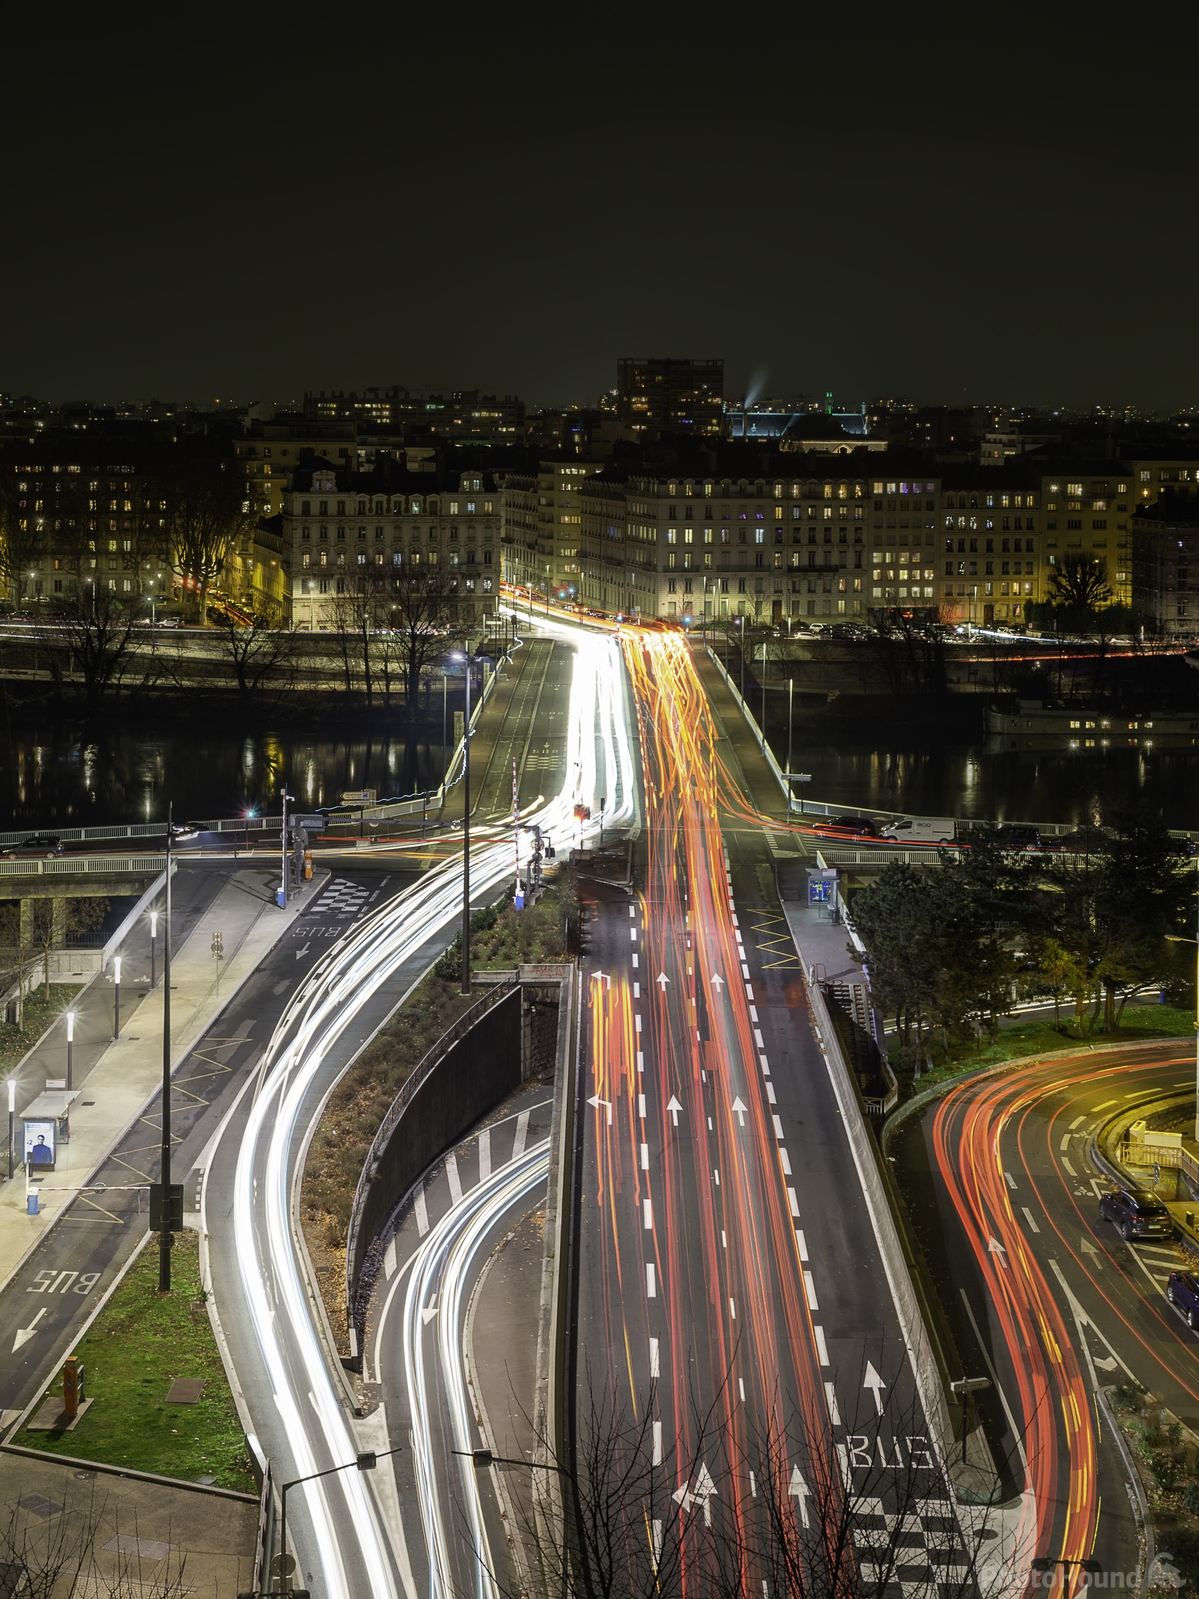 Image of Croix-Rousse Tunnel Exit by Elliot hh